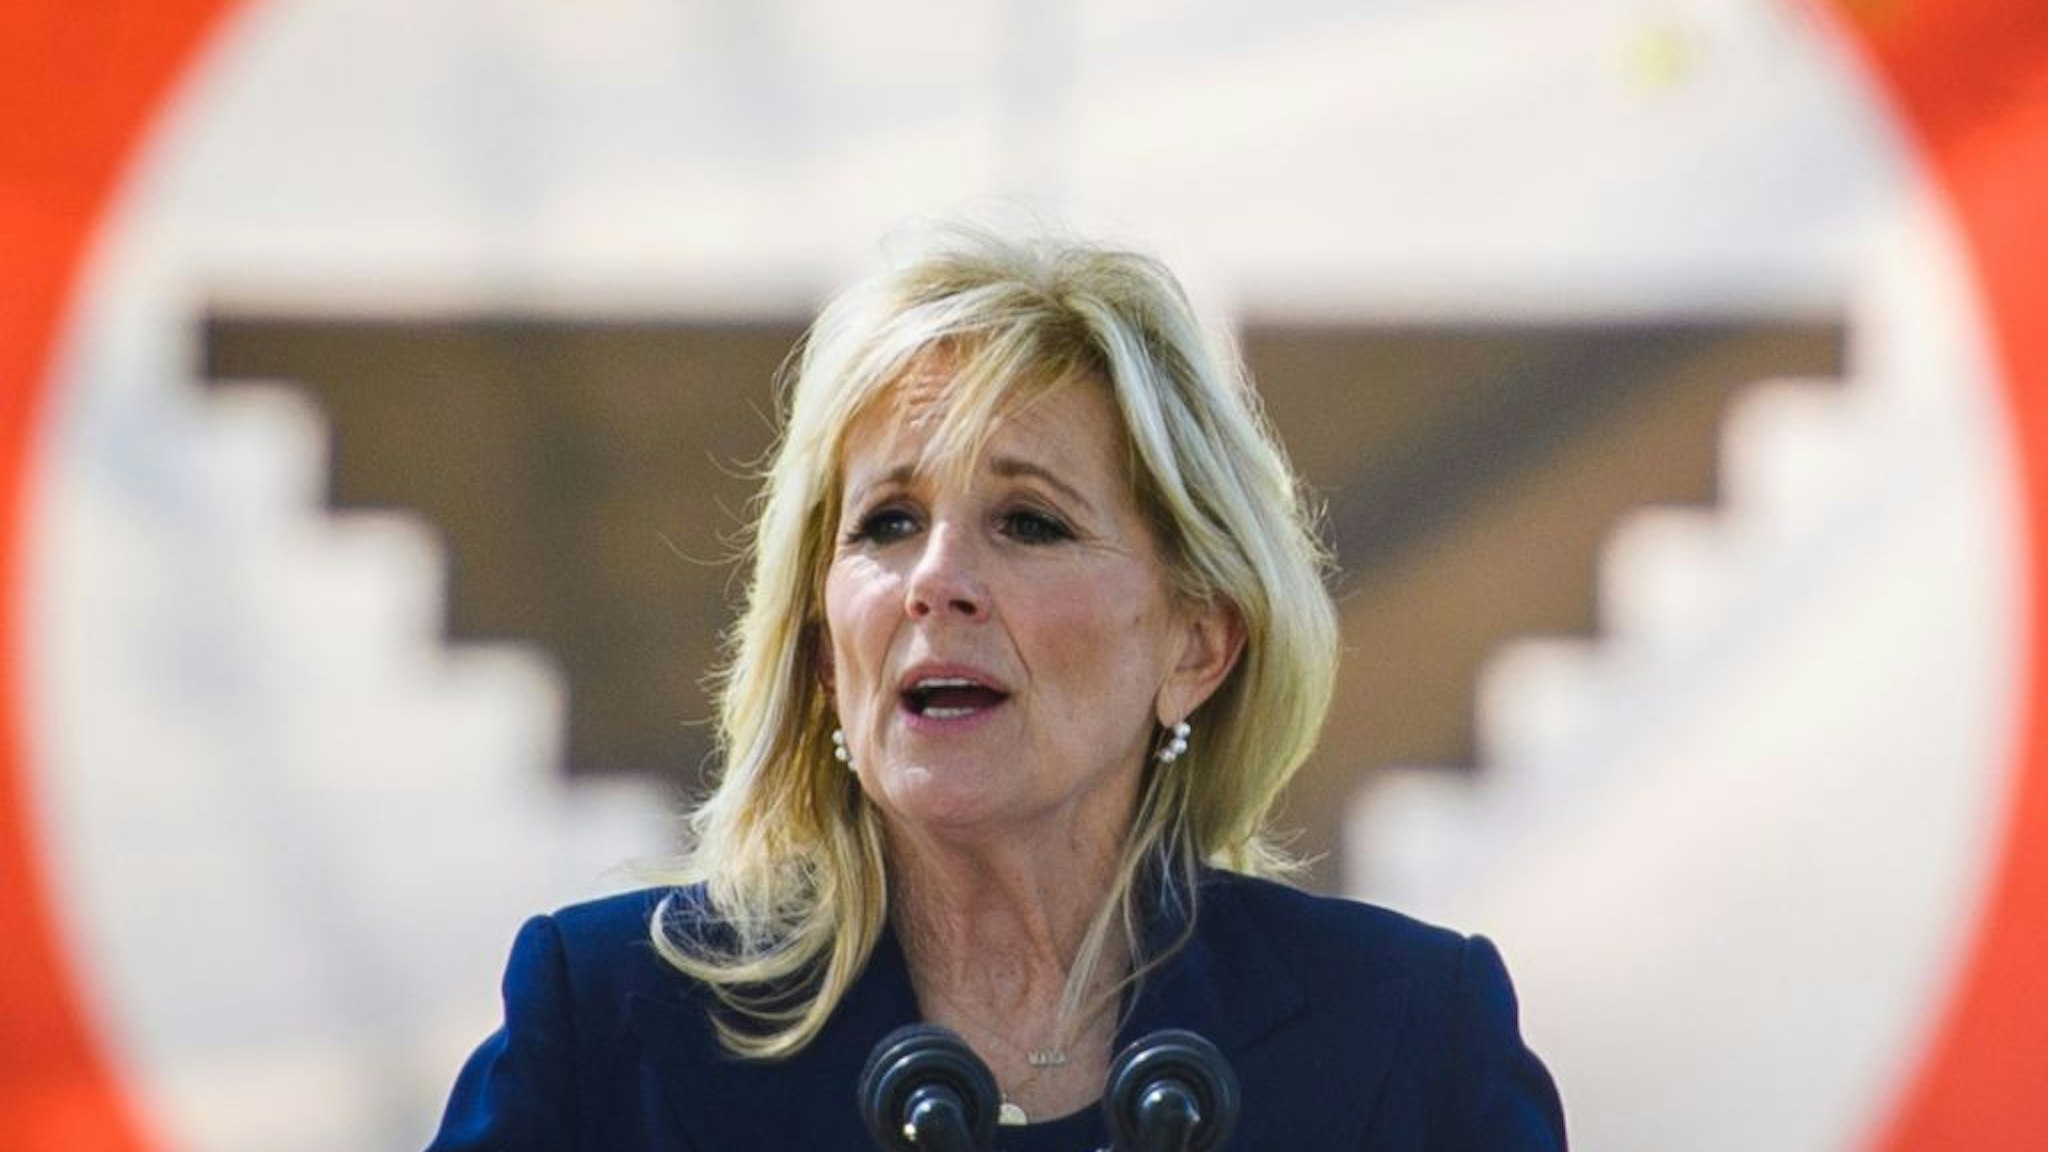 US First Lady Jill Biden speaks during her visit to The Forty Acres, the first headquarters of the United Farm Workers labor union, in Delano, California on March 31, 2021. (Photo by MANDEL NGAN / POOL / AFP) (Photo by MANDEL NGAN/POOL/AFP via Getty Images)